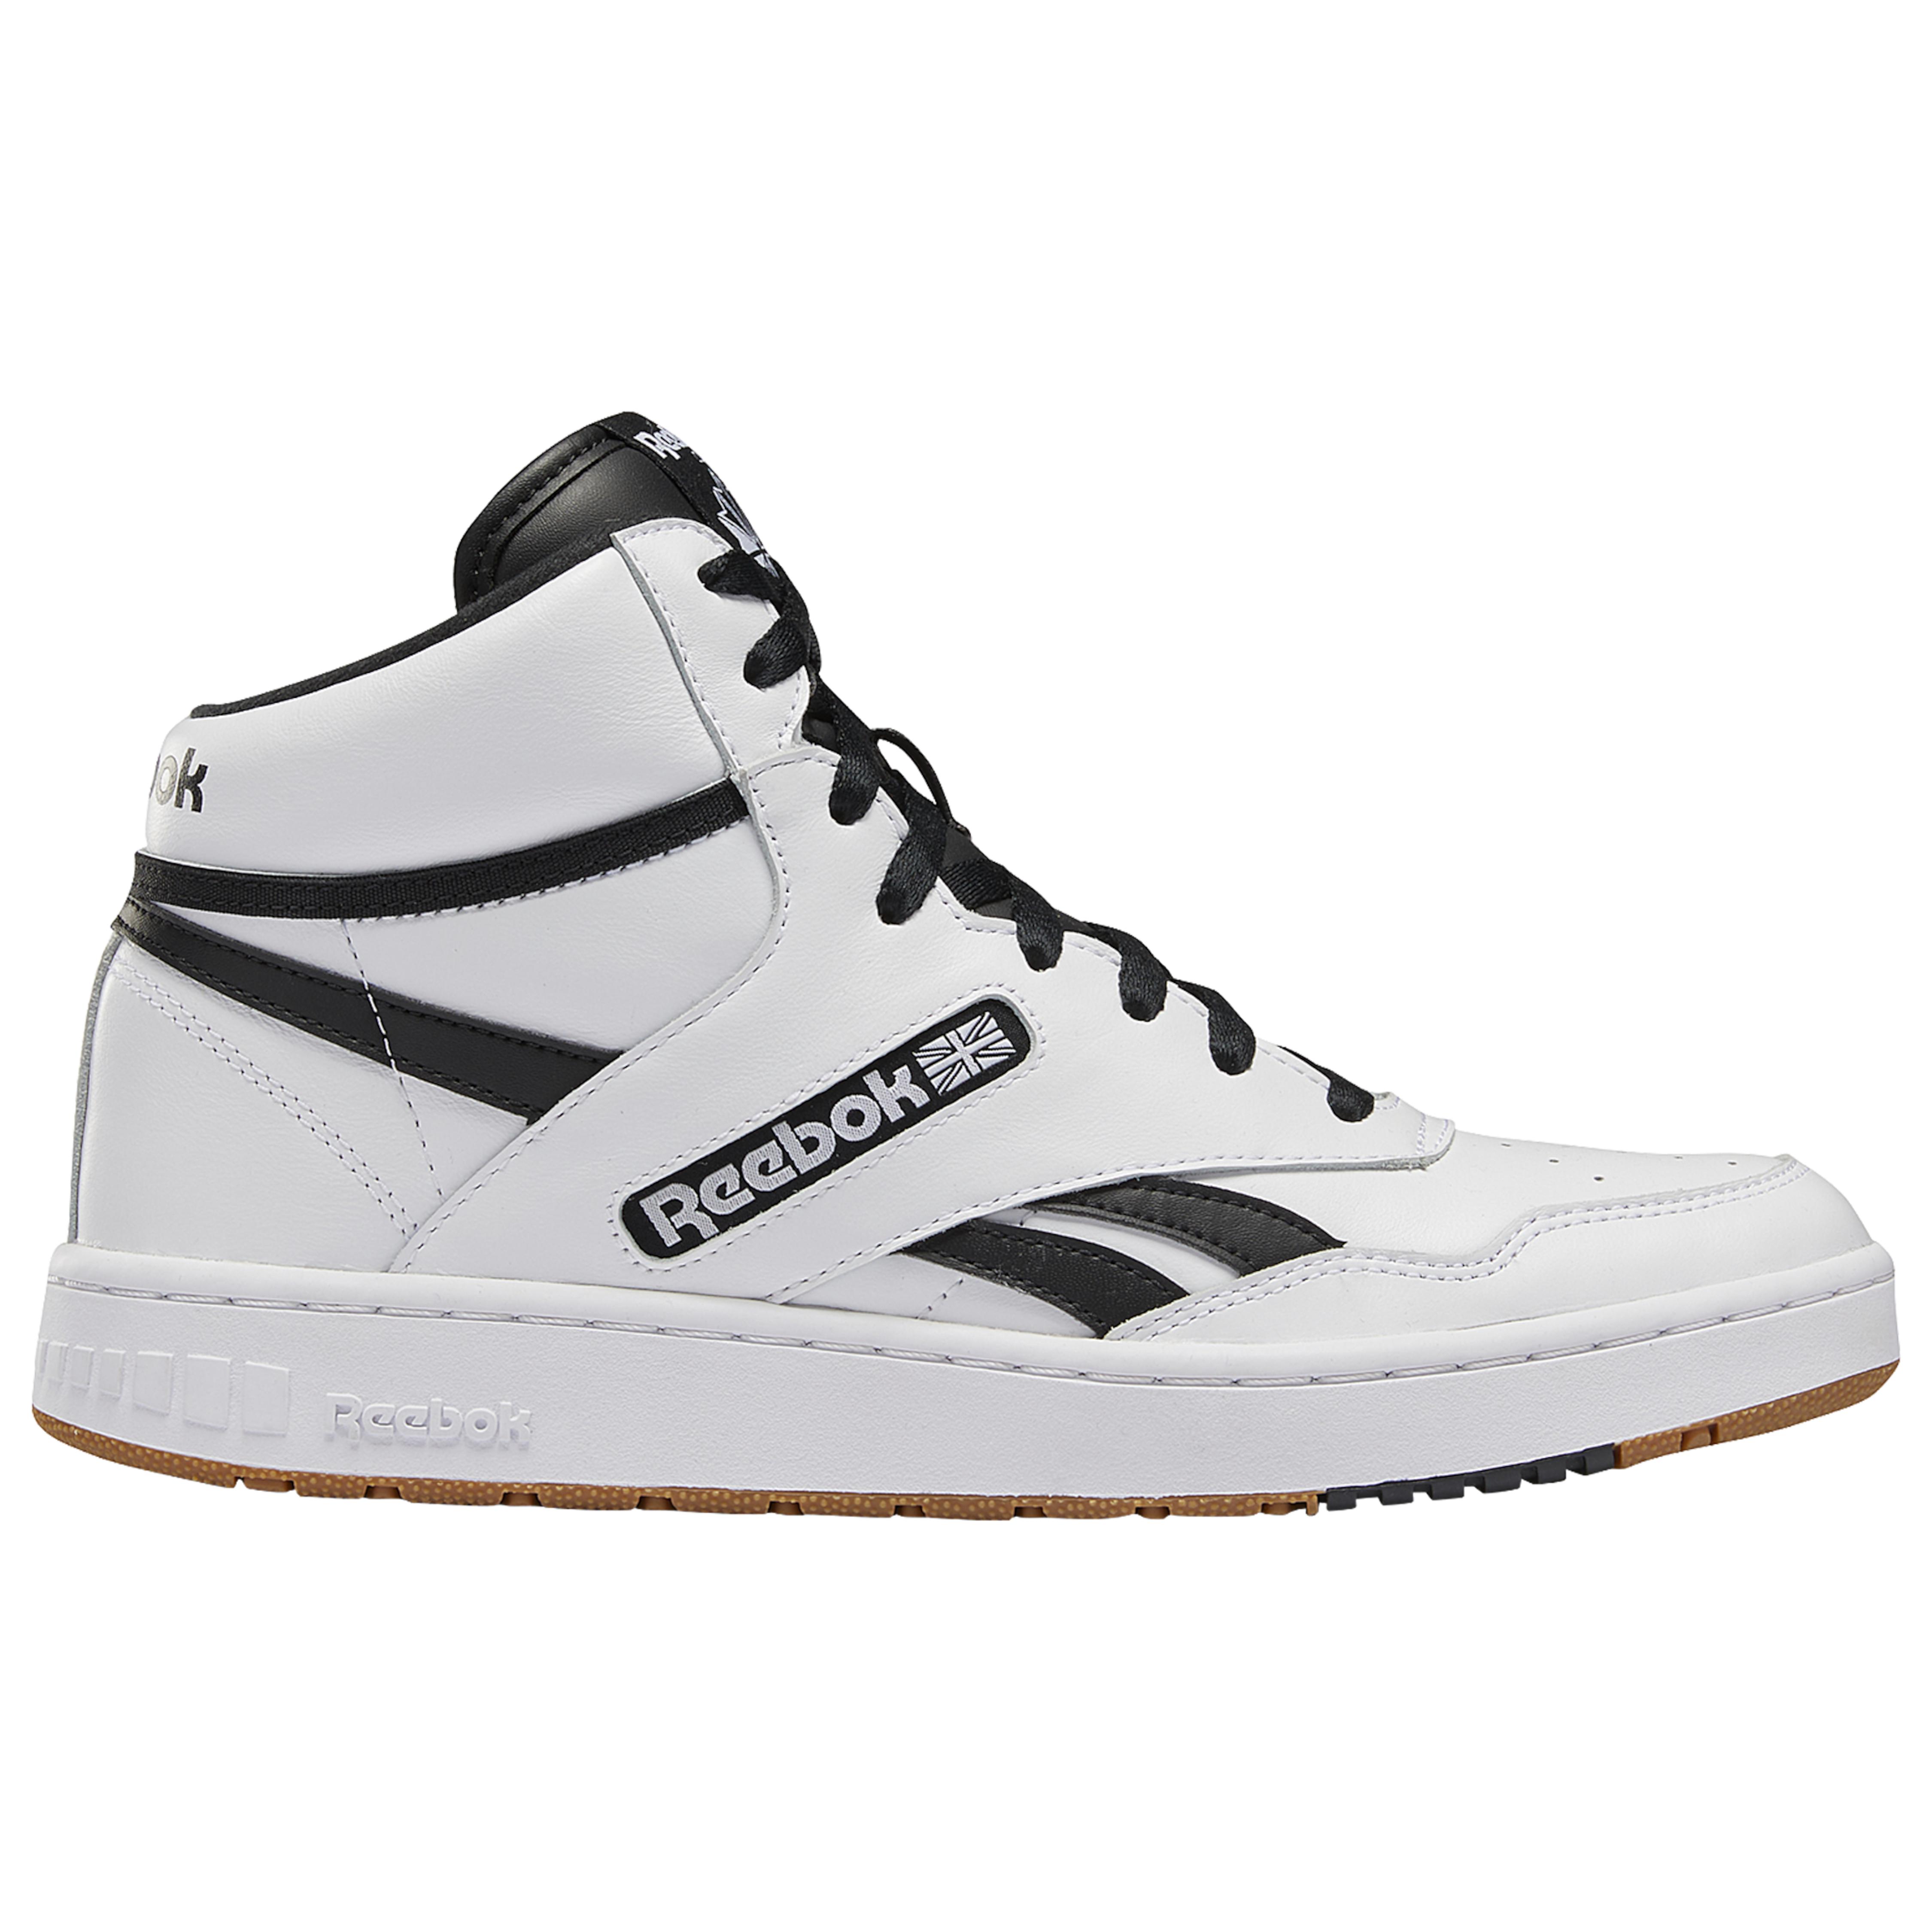 Reebok Leather Bb4600 in White for Men - Lyst